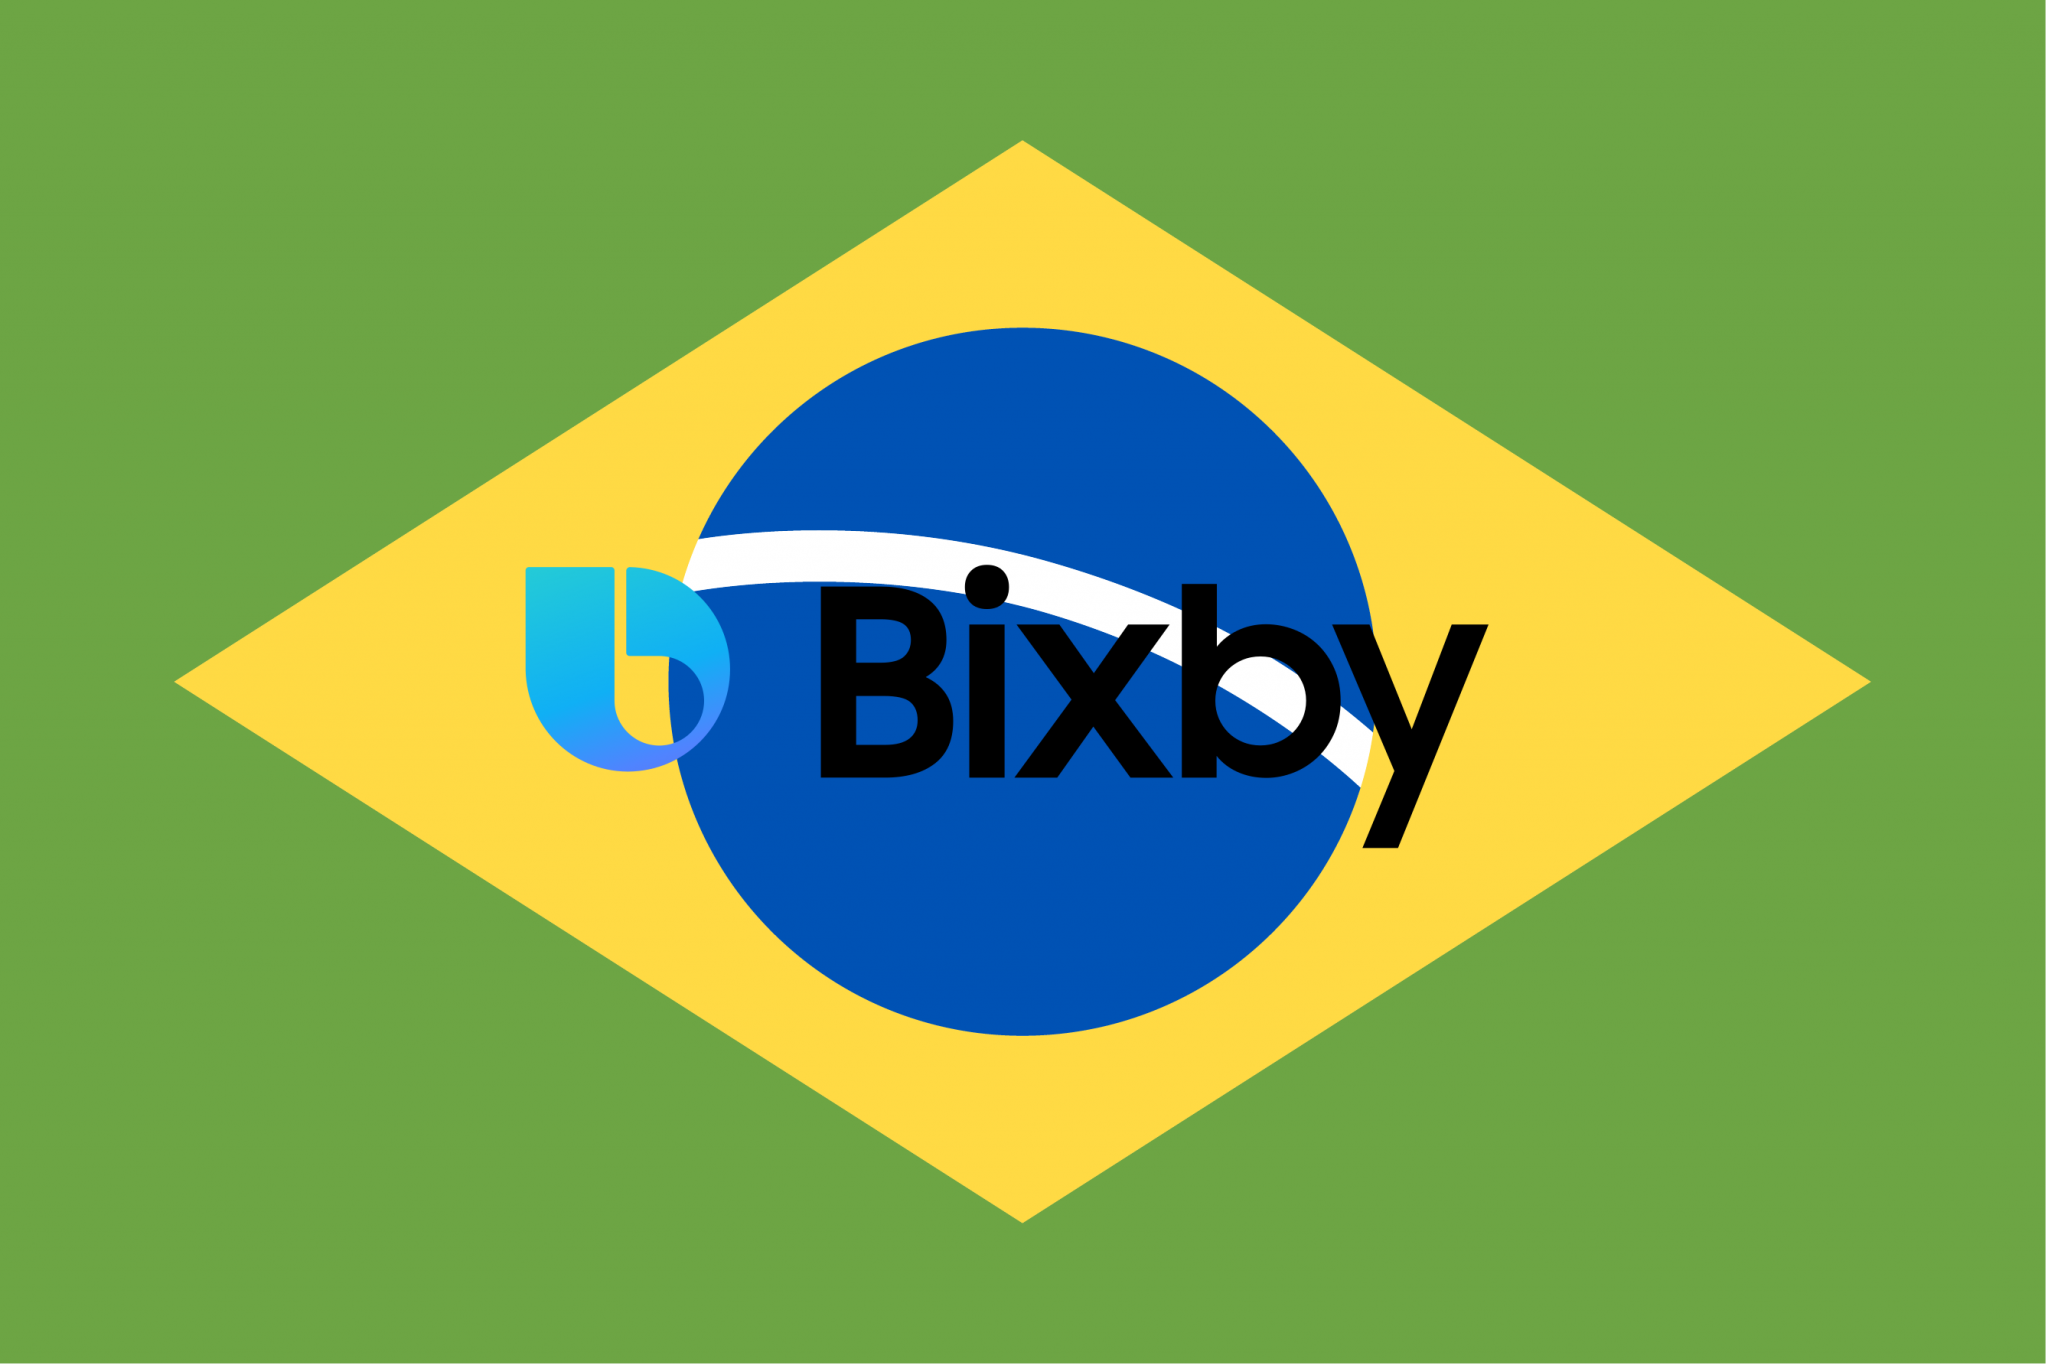 It took, but Bixby will finally be launched in Portuguese in Brazil